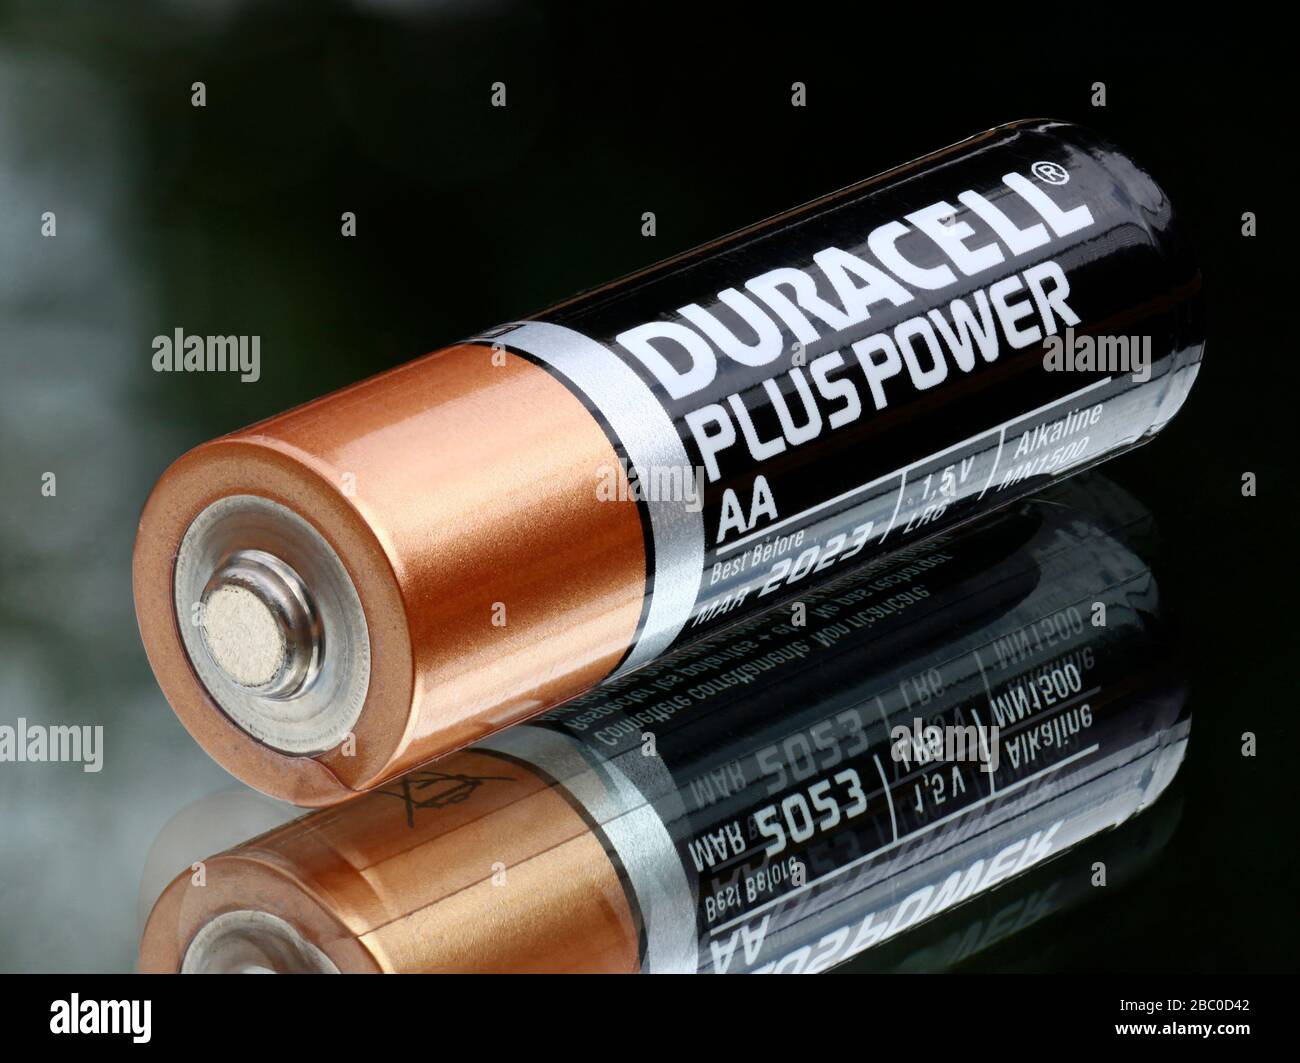 Piles Duracell AA Plus Power